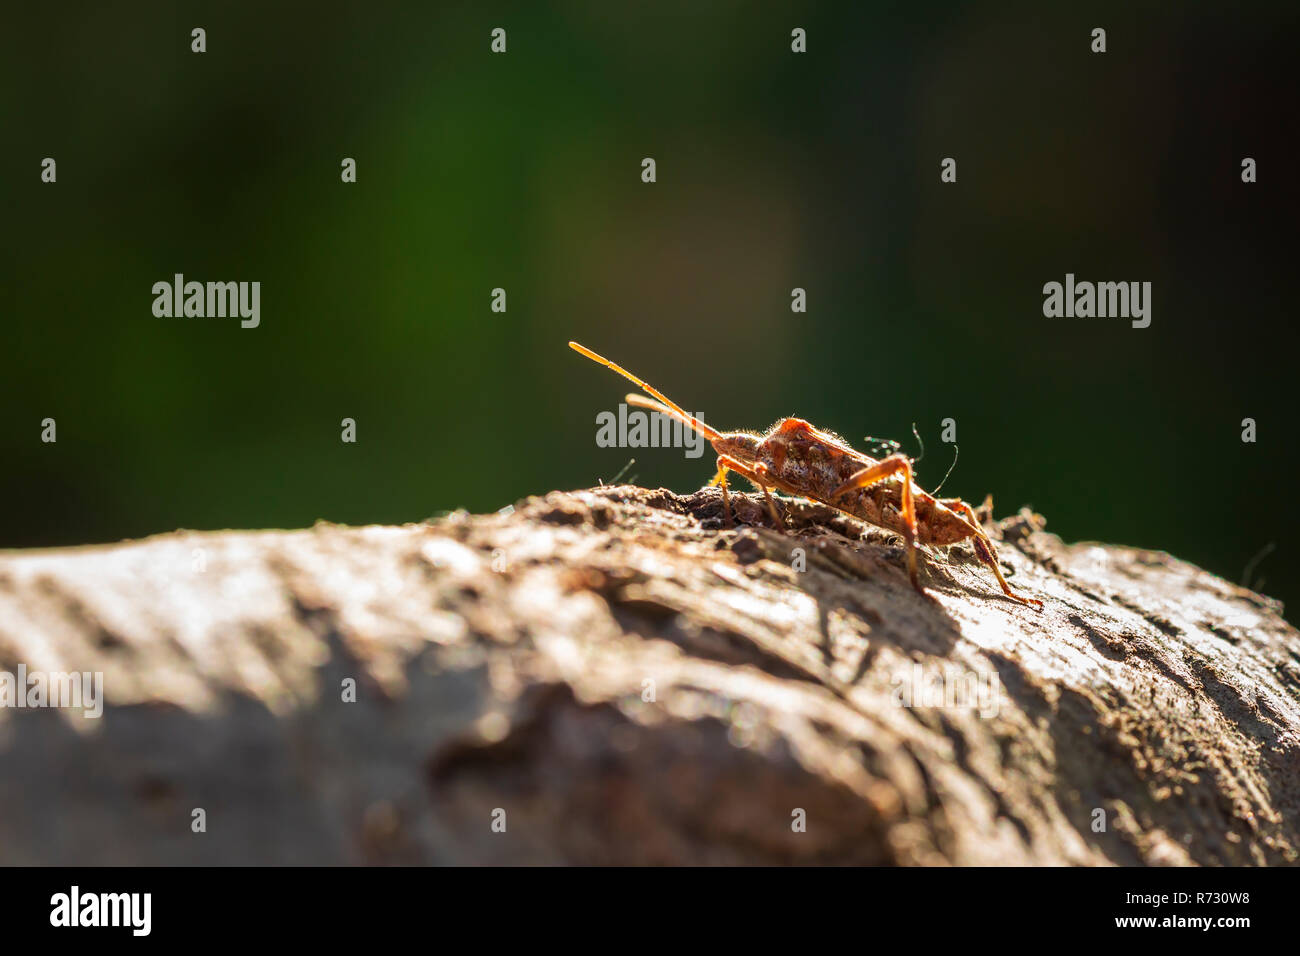 Western conifer seed bug insect, Leptoglossus occidentalis, or WCSB, crawling on wood in bright sunlight Stock Photo